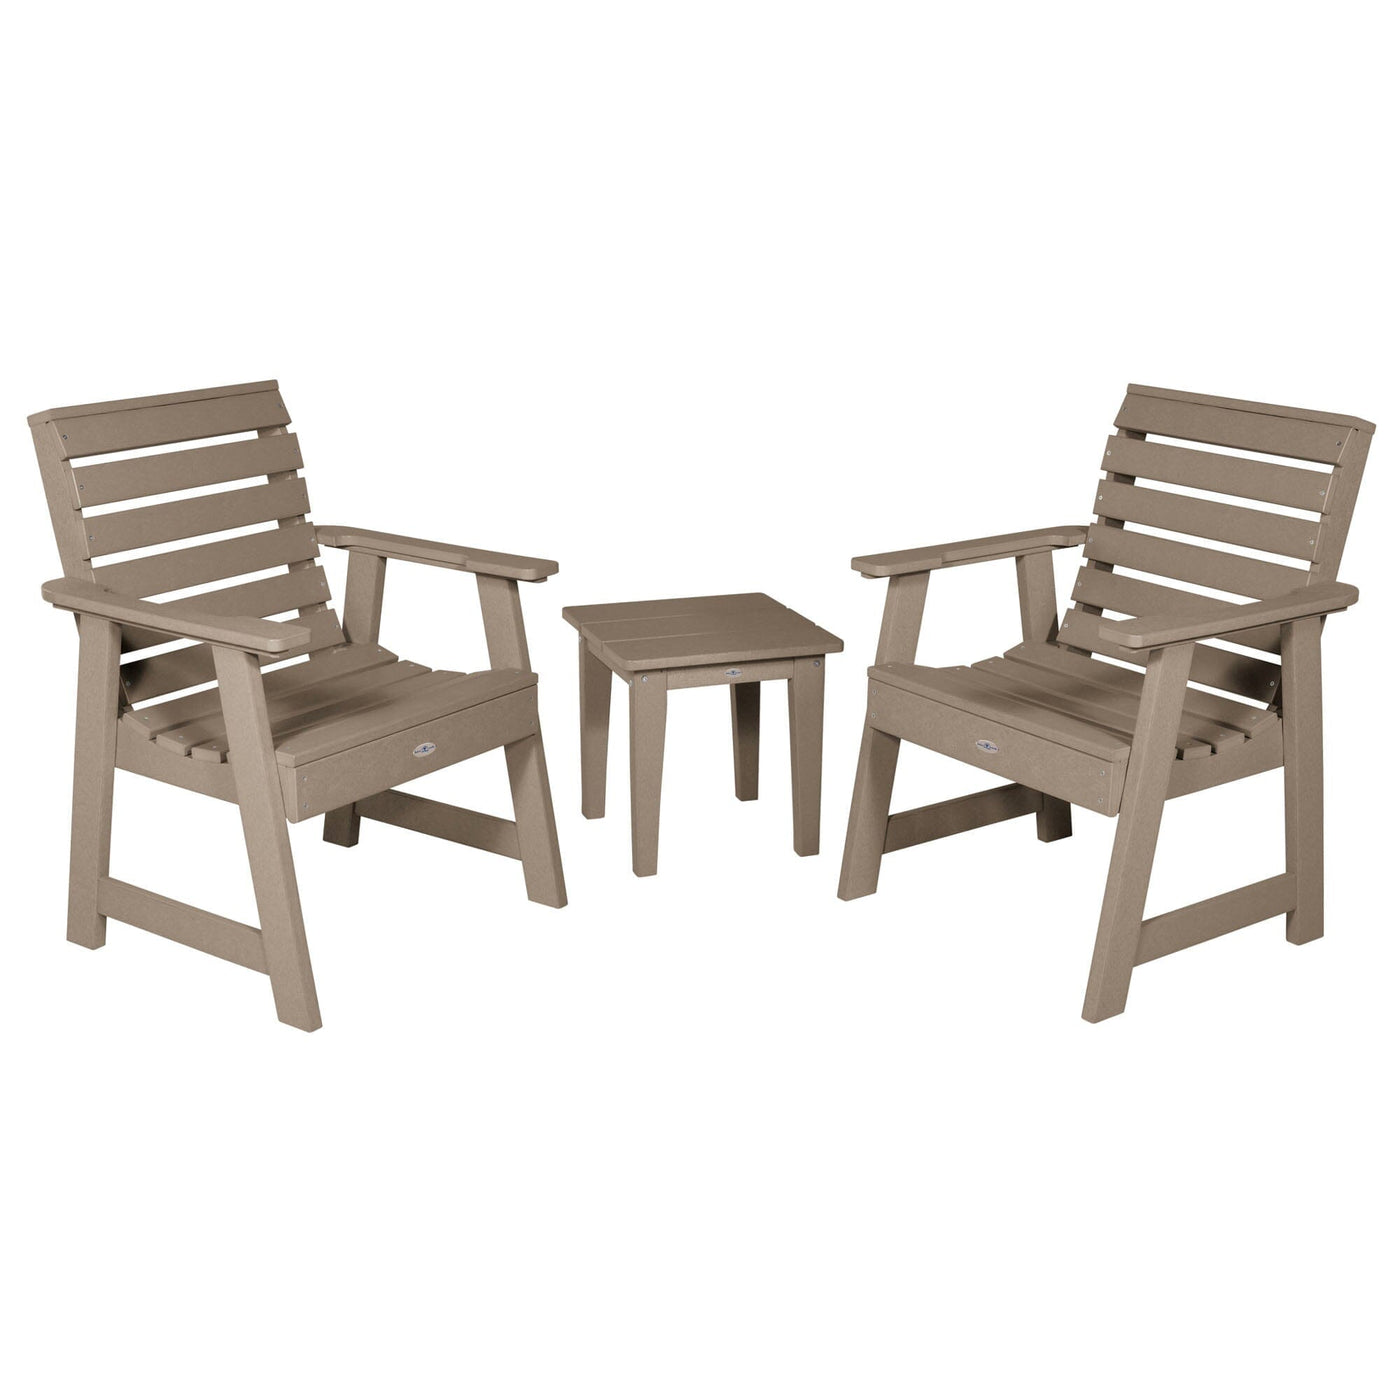 Two Riverside Garden Chairs and Side Table Set Kitted Set Bahia Verde Outdoors Cabana Tan 